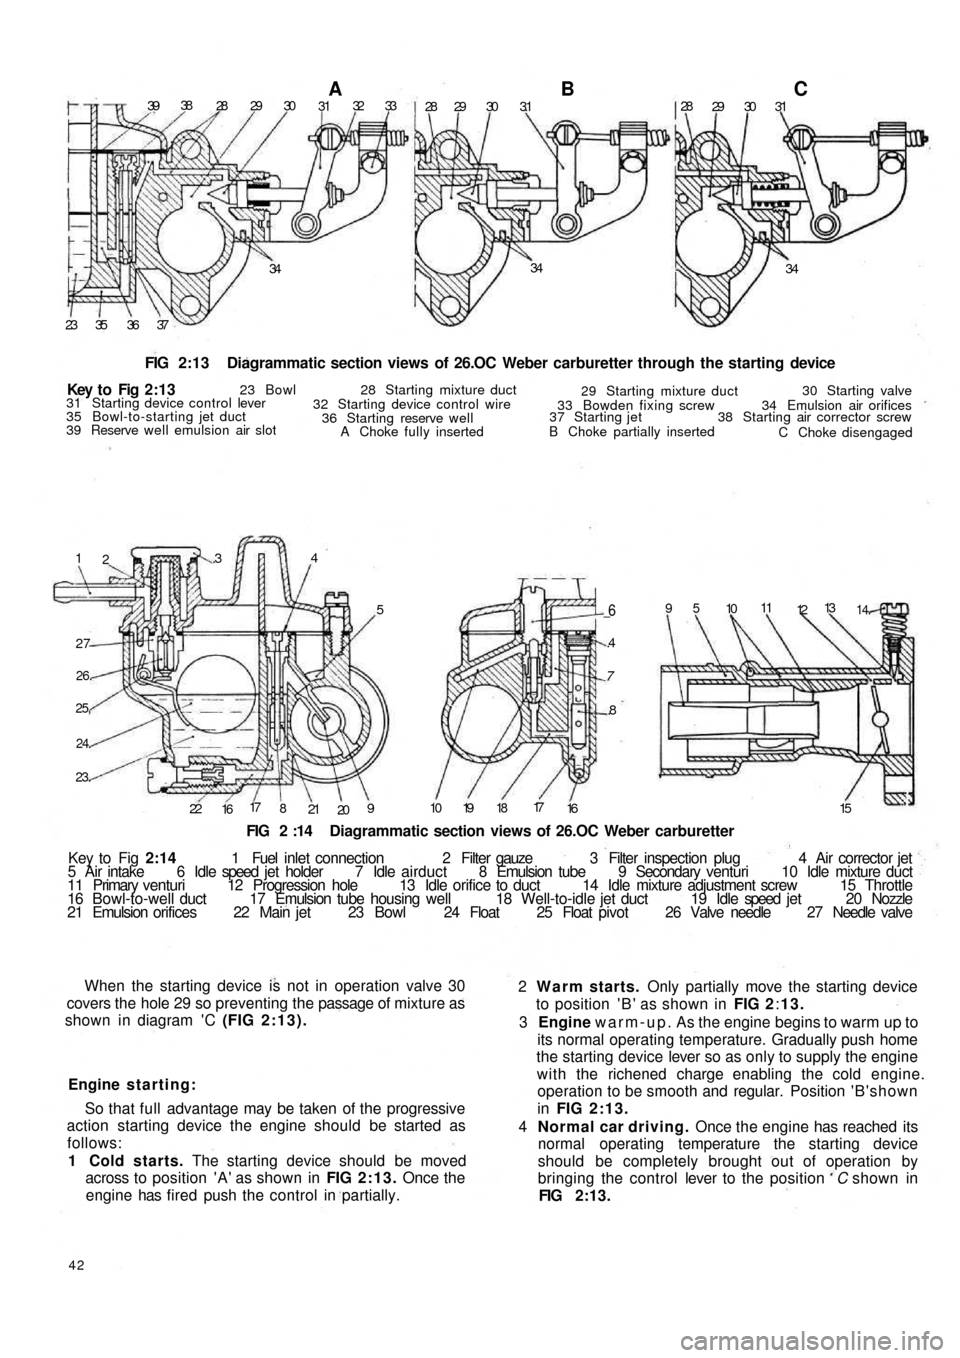 FIAT 500 1973 1.G Owners Guide 3938
28 29 30A3132 33
28 29 30 3.1B28
29 30 31C
34 34
34
37 36 35 23
FIG 2:13  Diagrammatic section views of 26.OC Weber carburetter through the starting device
1
2.34
5
27
26.
25,
24.
23.
22
1617
8
2